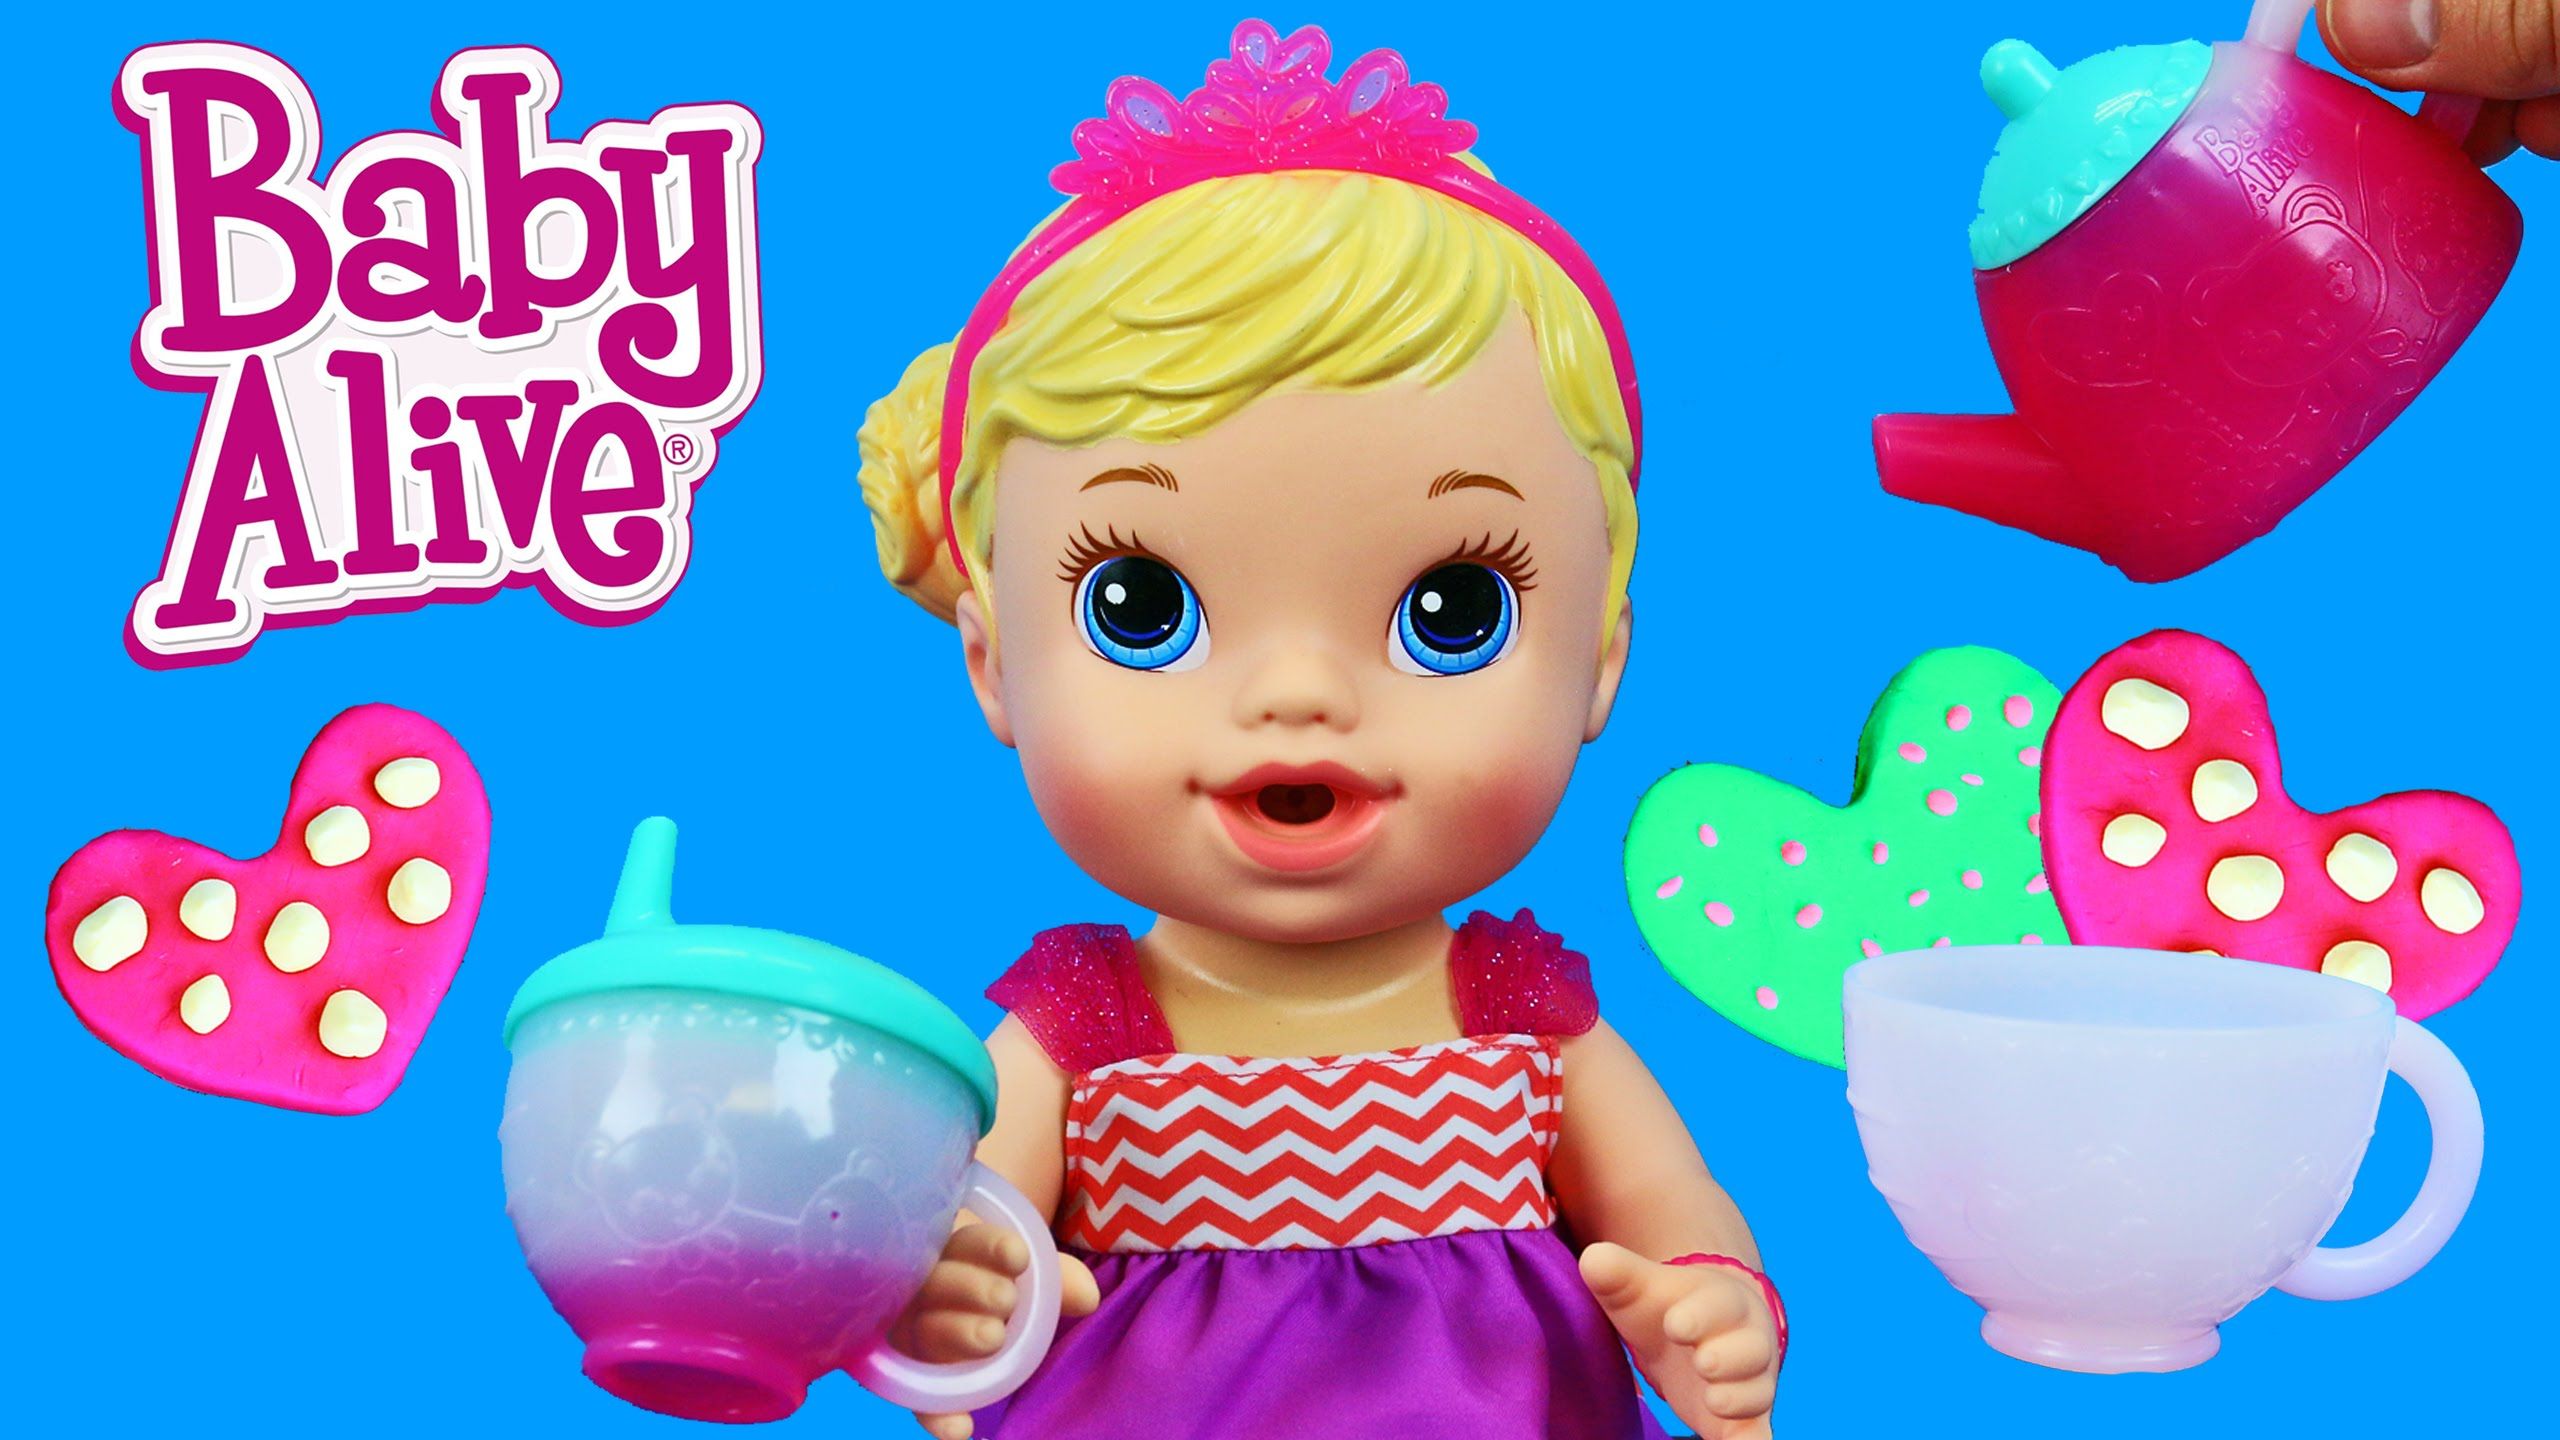 Baby Alive Teacup Surprise Baby Doll Fun Tea Party with DIY Play Doh Cookies by DisneyCarToys. Fun tea party, Baby alive, Baby dolls